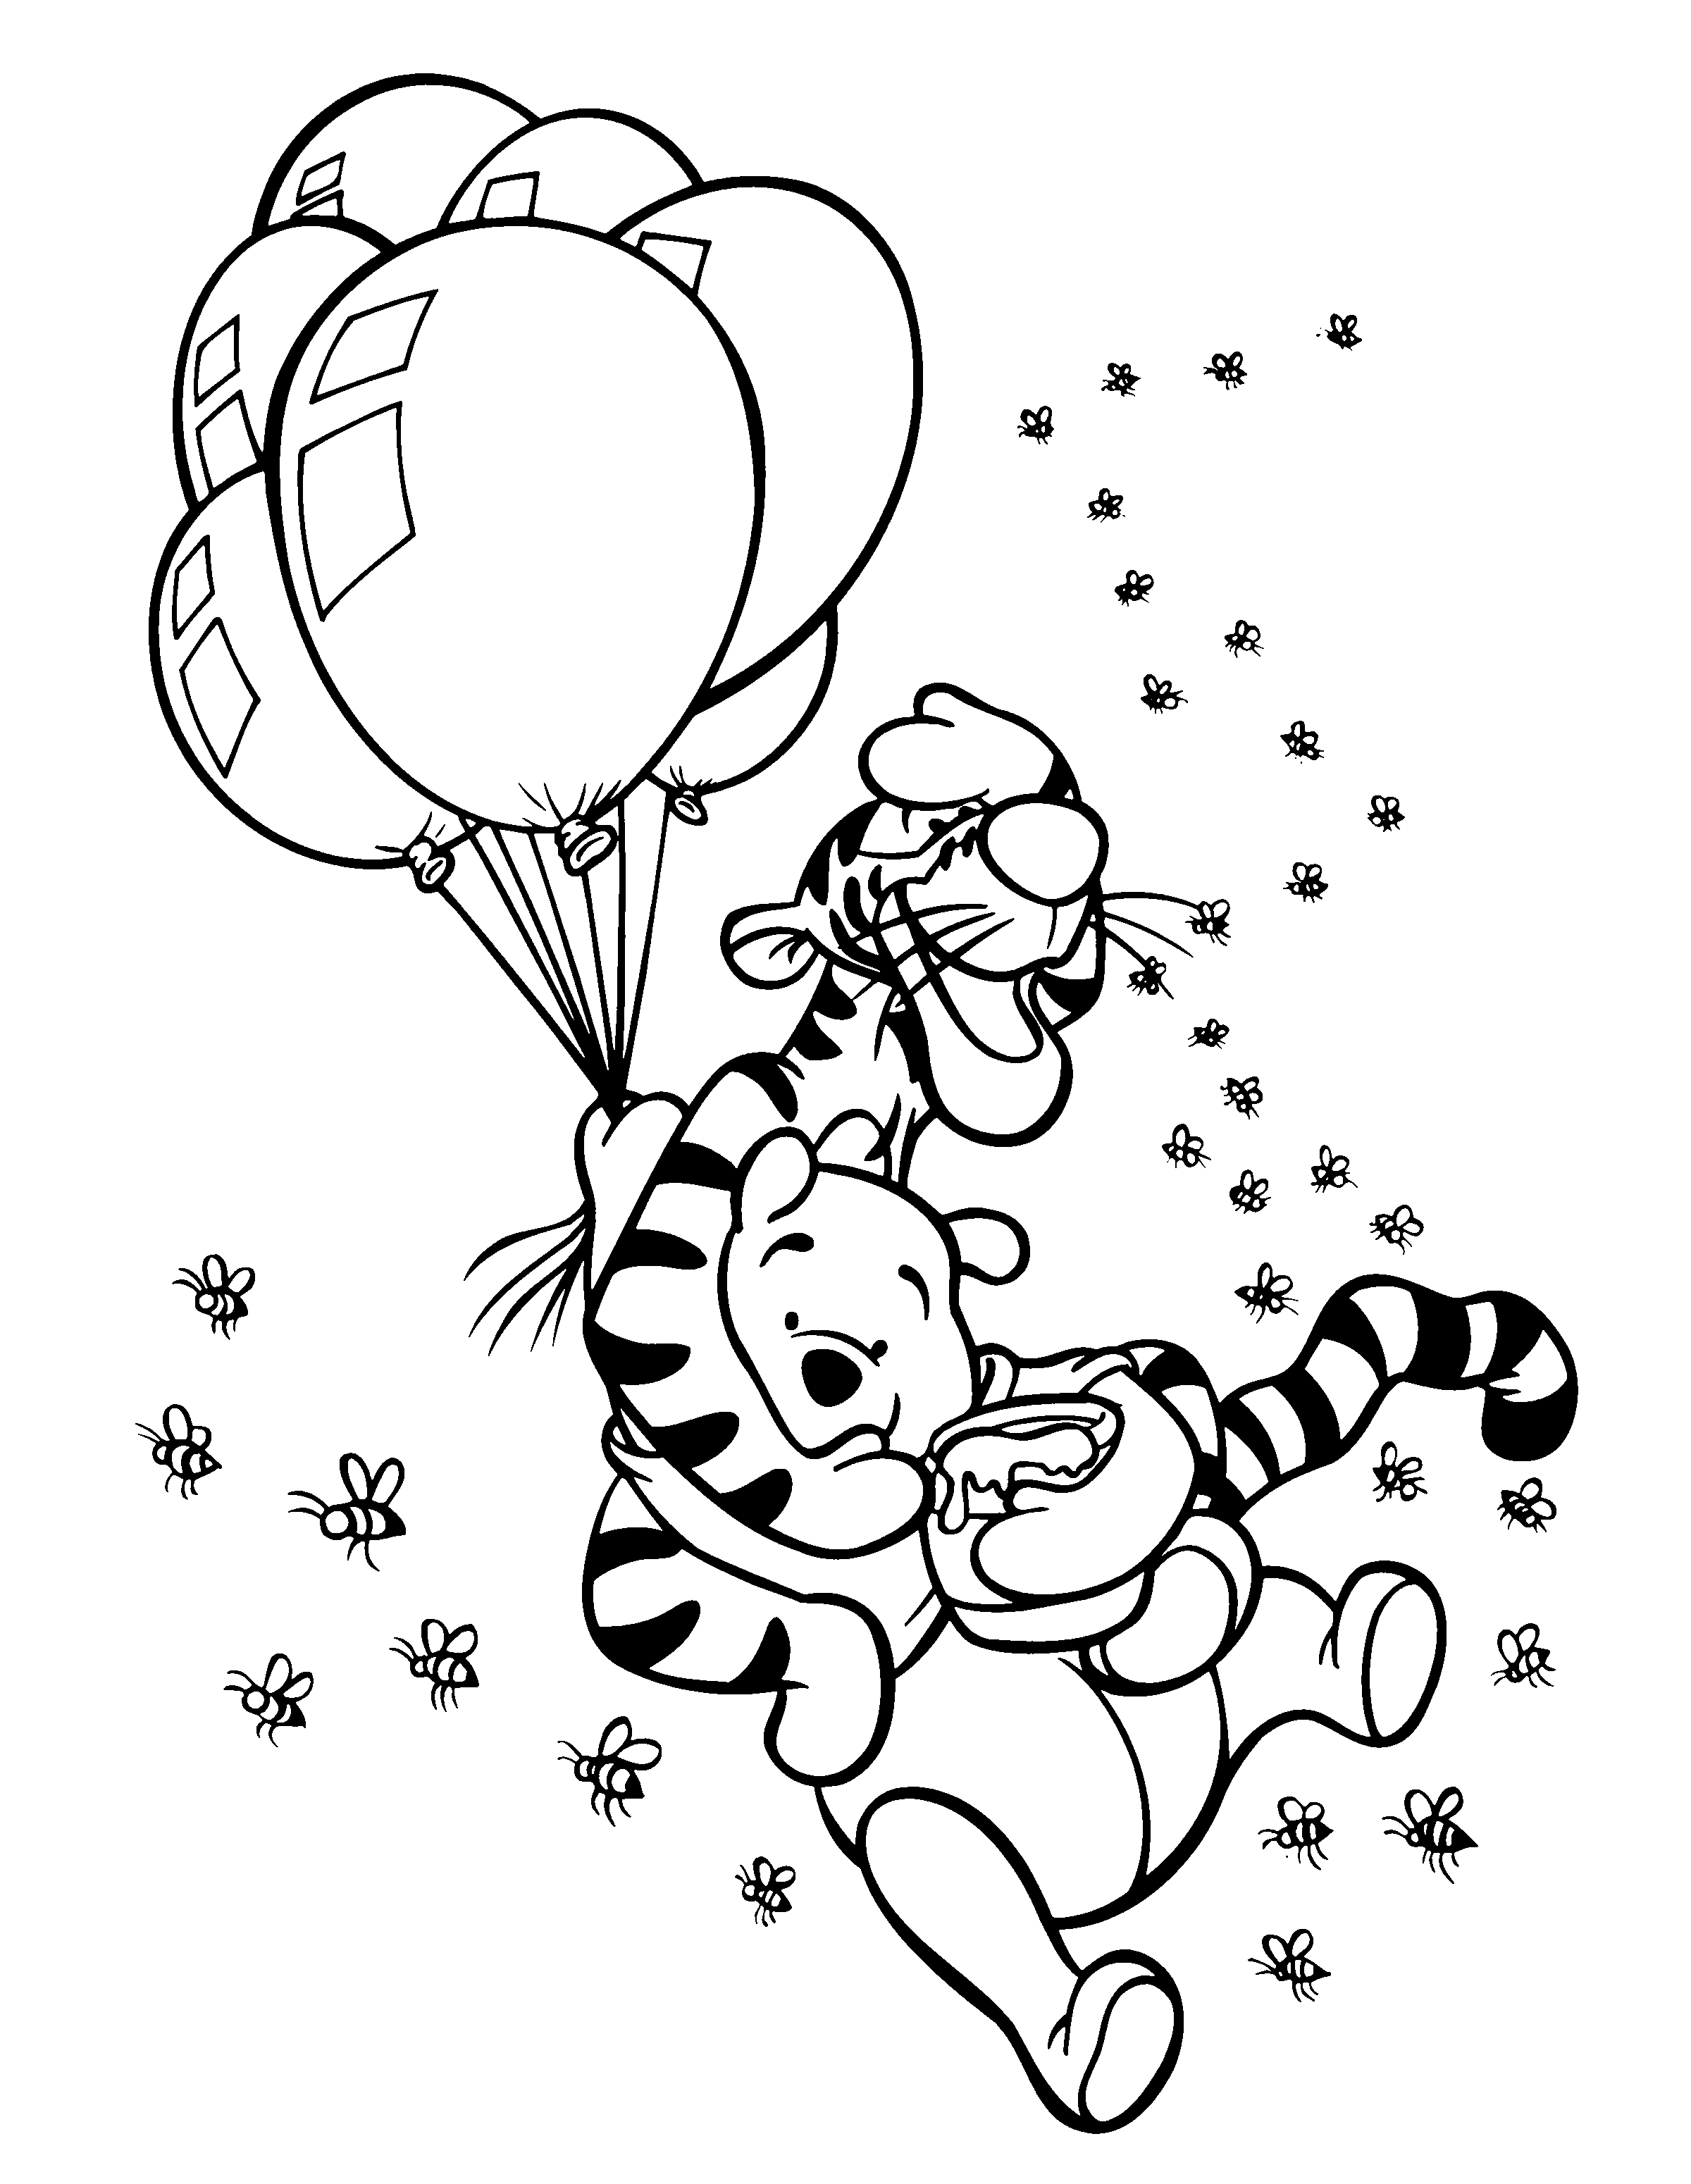 animated-coloring-pages-winnie-the-pooh-image-0042